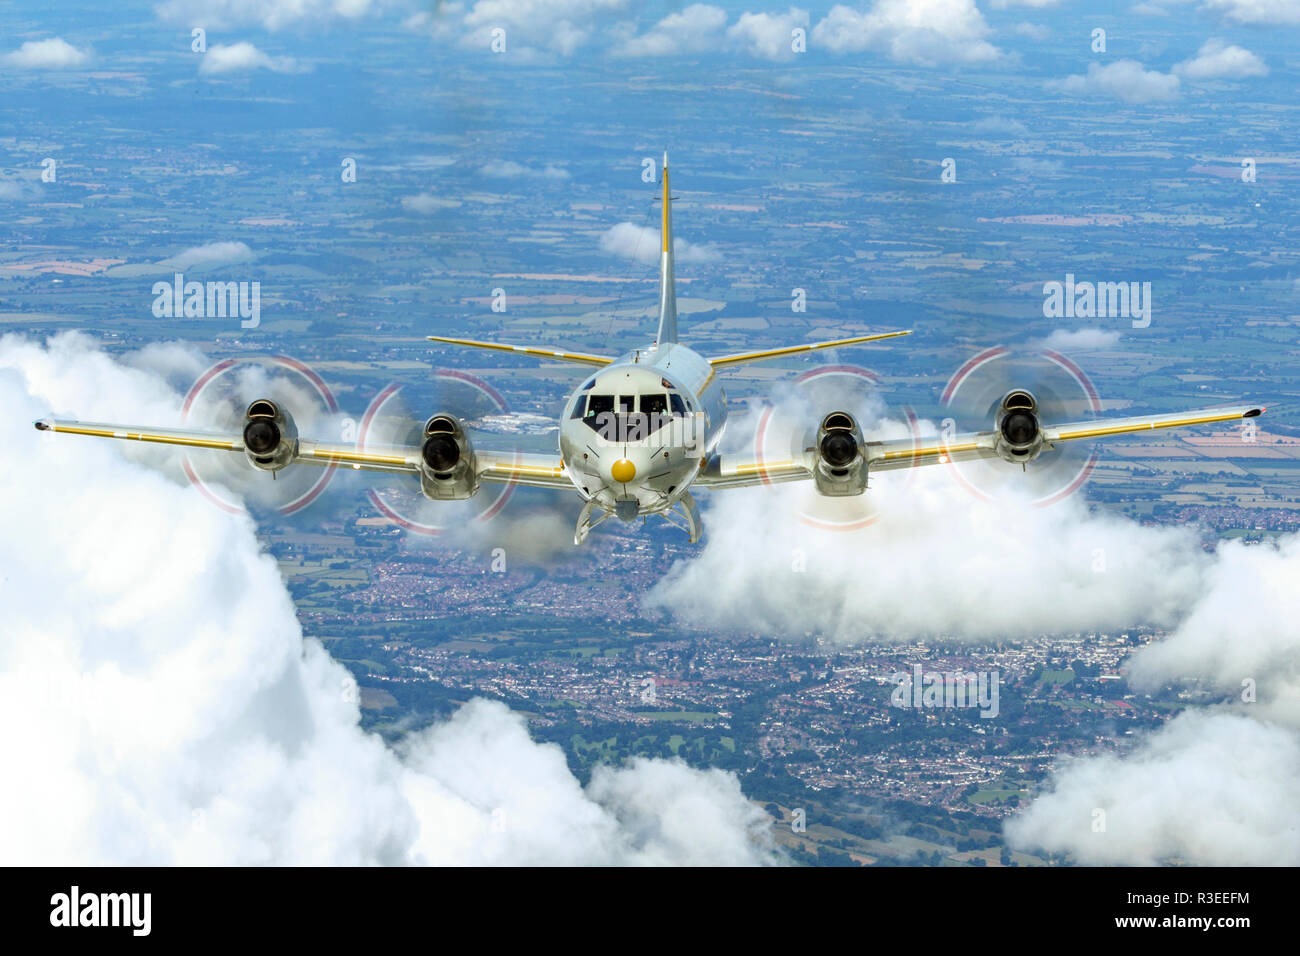 German Navy, Lockheed P-3 Orion, a four-engine turboprop anti-submarine and maritime surveillance aircraft developed for the United States Navy and in Stock Photo